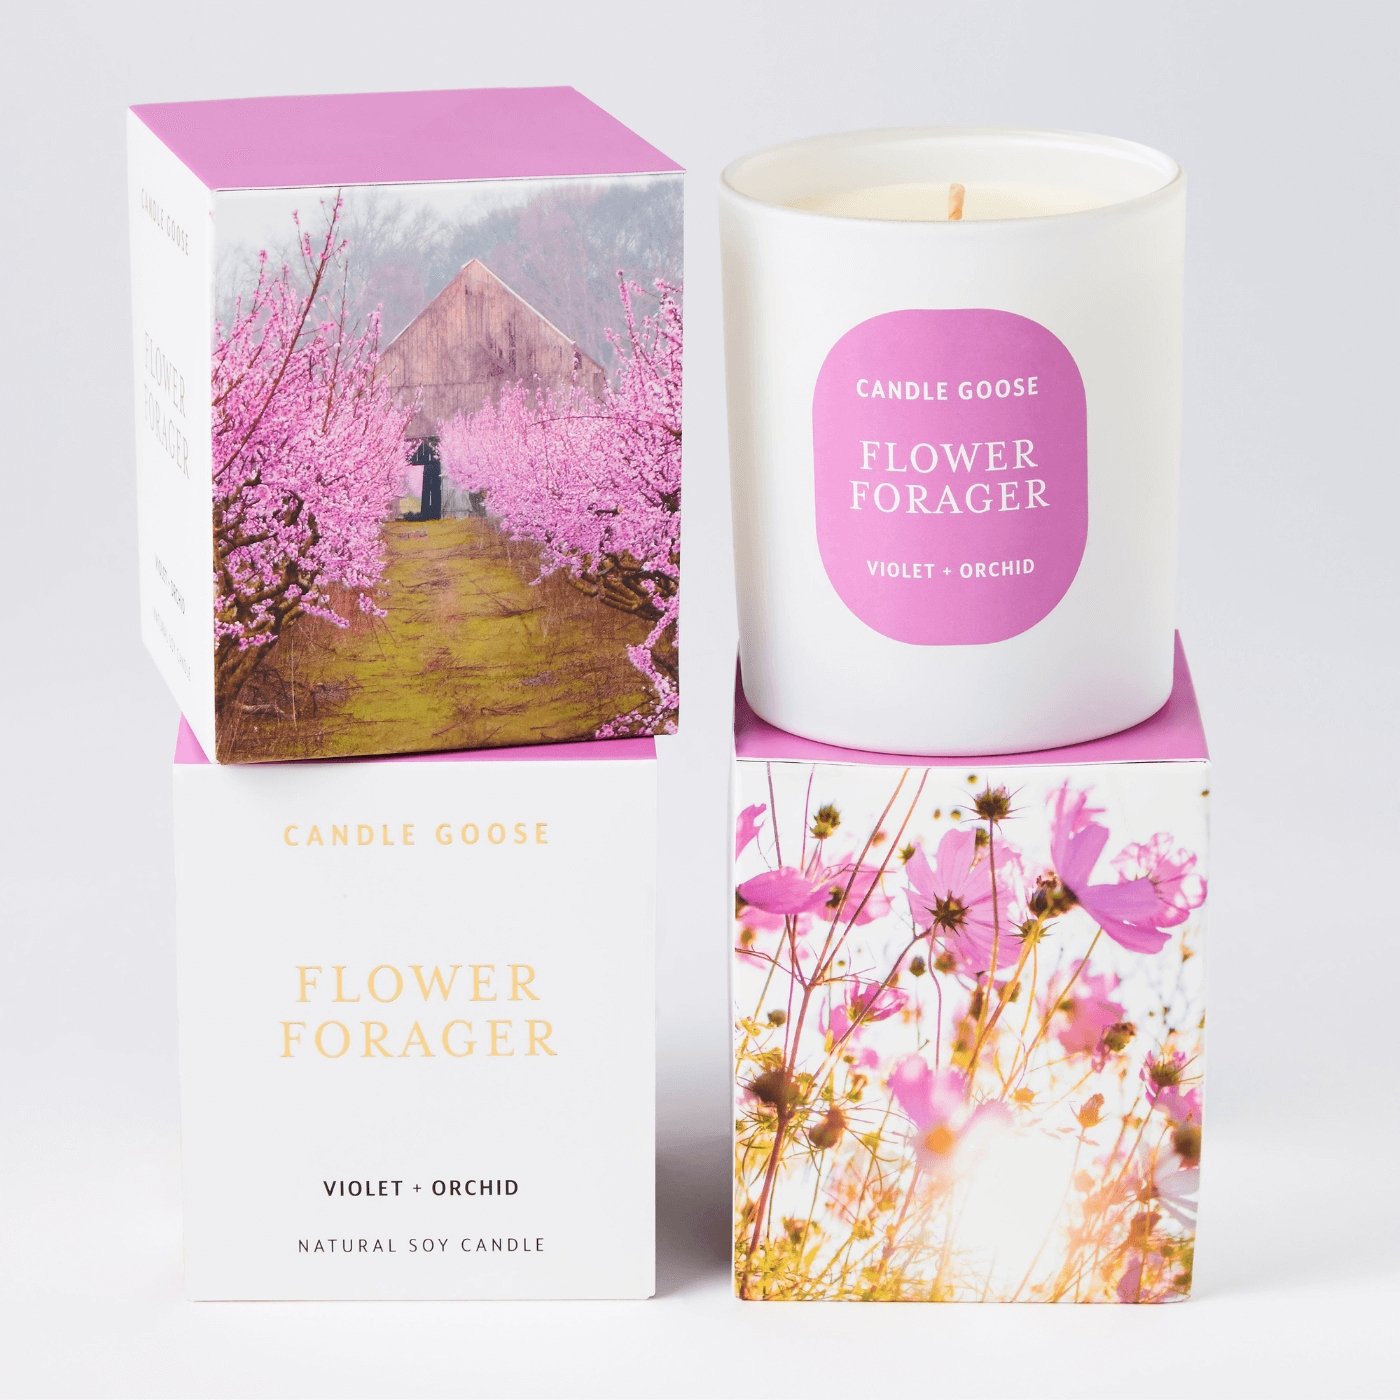 Flower Forager Hand Poured Soy Wax Candle - 300g -The Mountain Merchant -Candle Goose